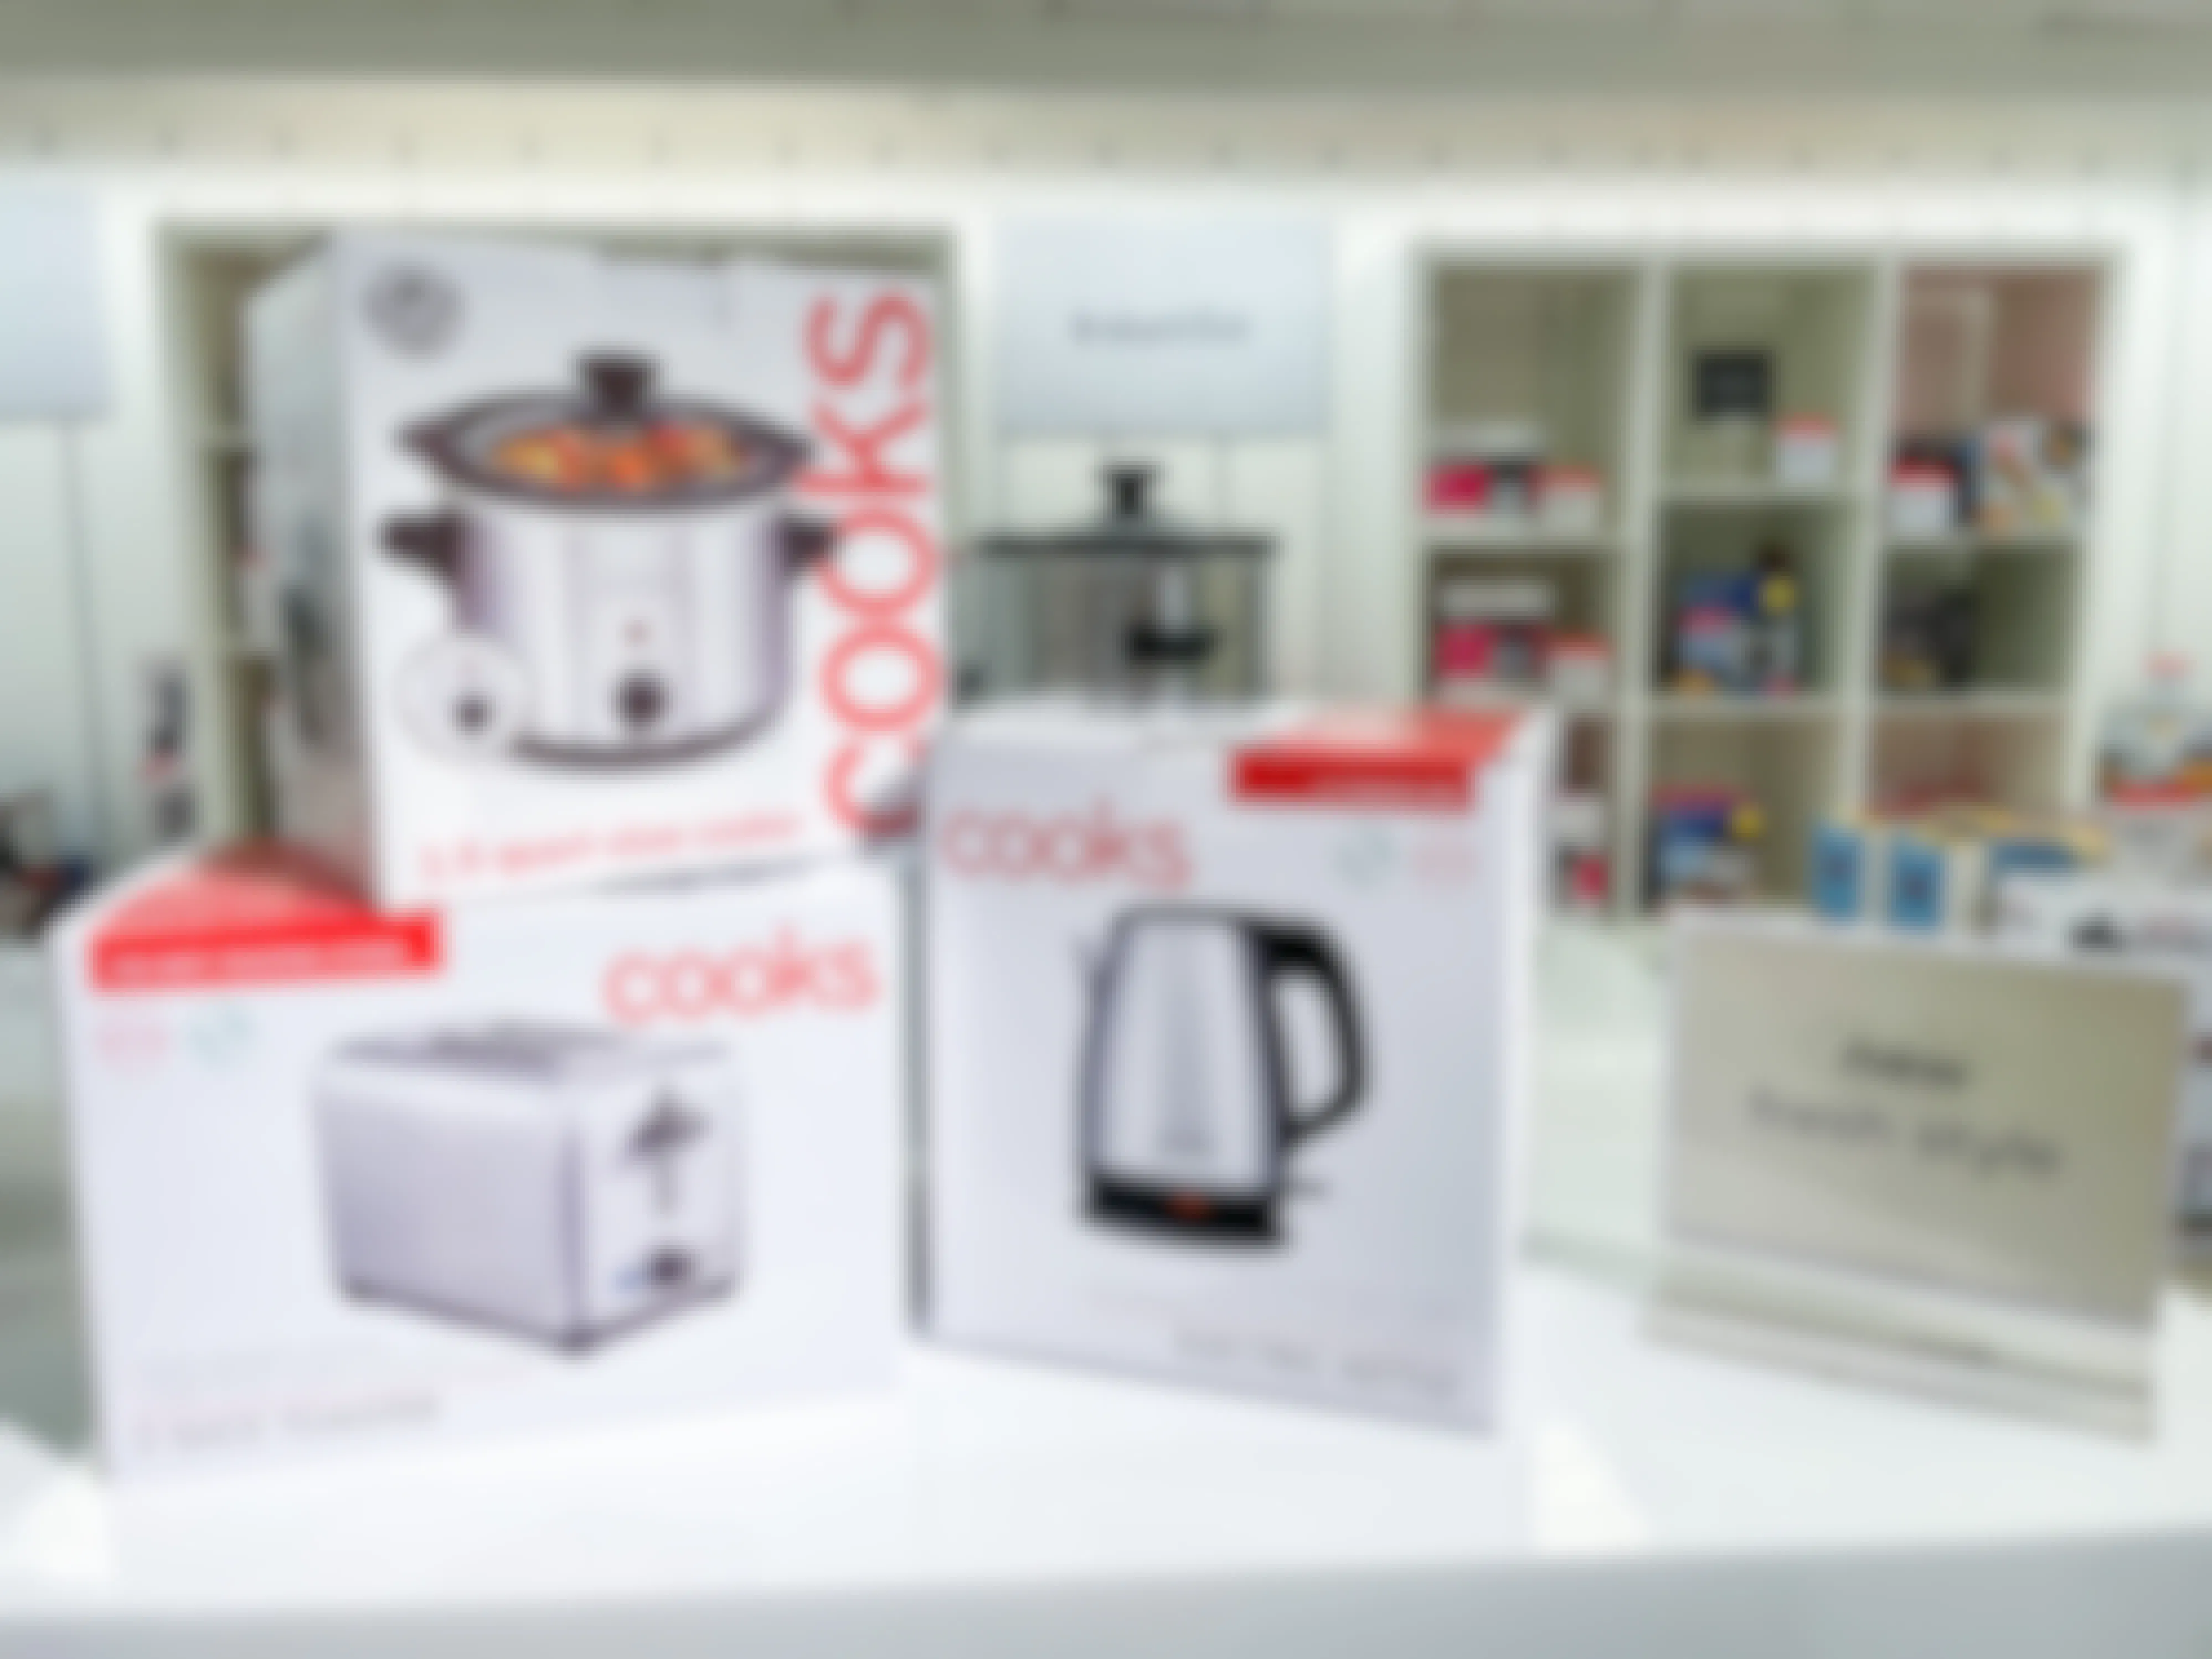 Cooks Small Appliances stacked on a display inside JCPenney.